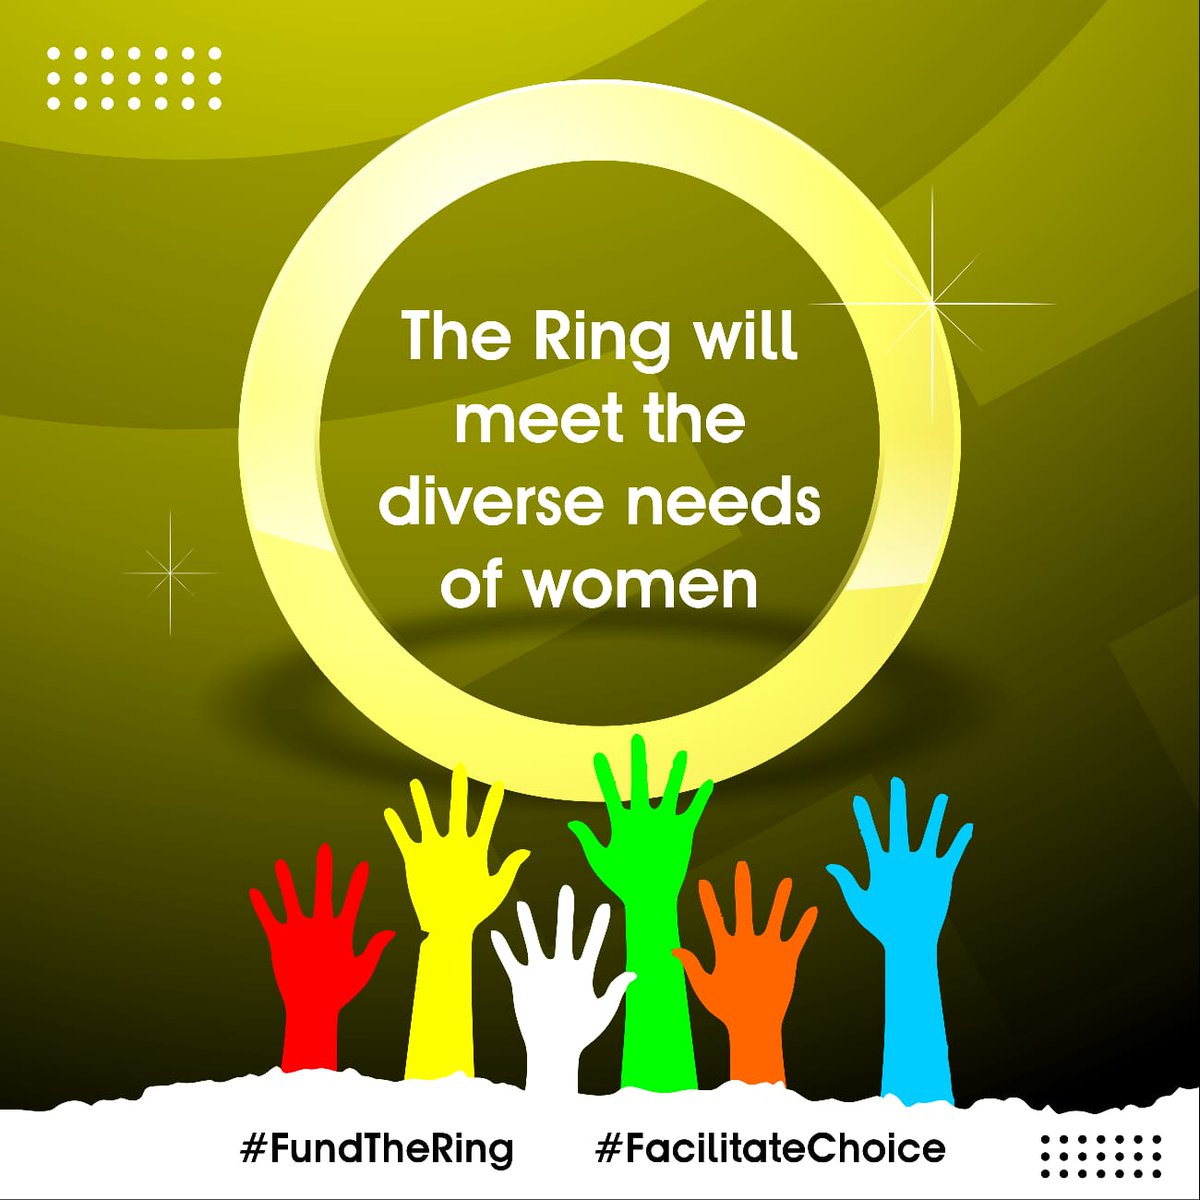 #FundTheRing #FacilitateChoice Zimbabwe’s Medicines Control Authority approved the ring in July 2021 and South Africa’s Health Products Regulatory Authority approved it in March 2022.@JNkengasong @PEPFAR @Winnie_Byanyima @USAID @USAIDEastAfrica @AfricaCDC @WHO @GlobalFund